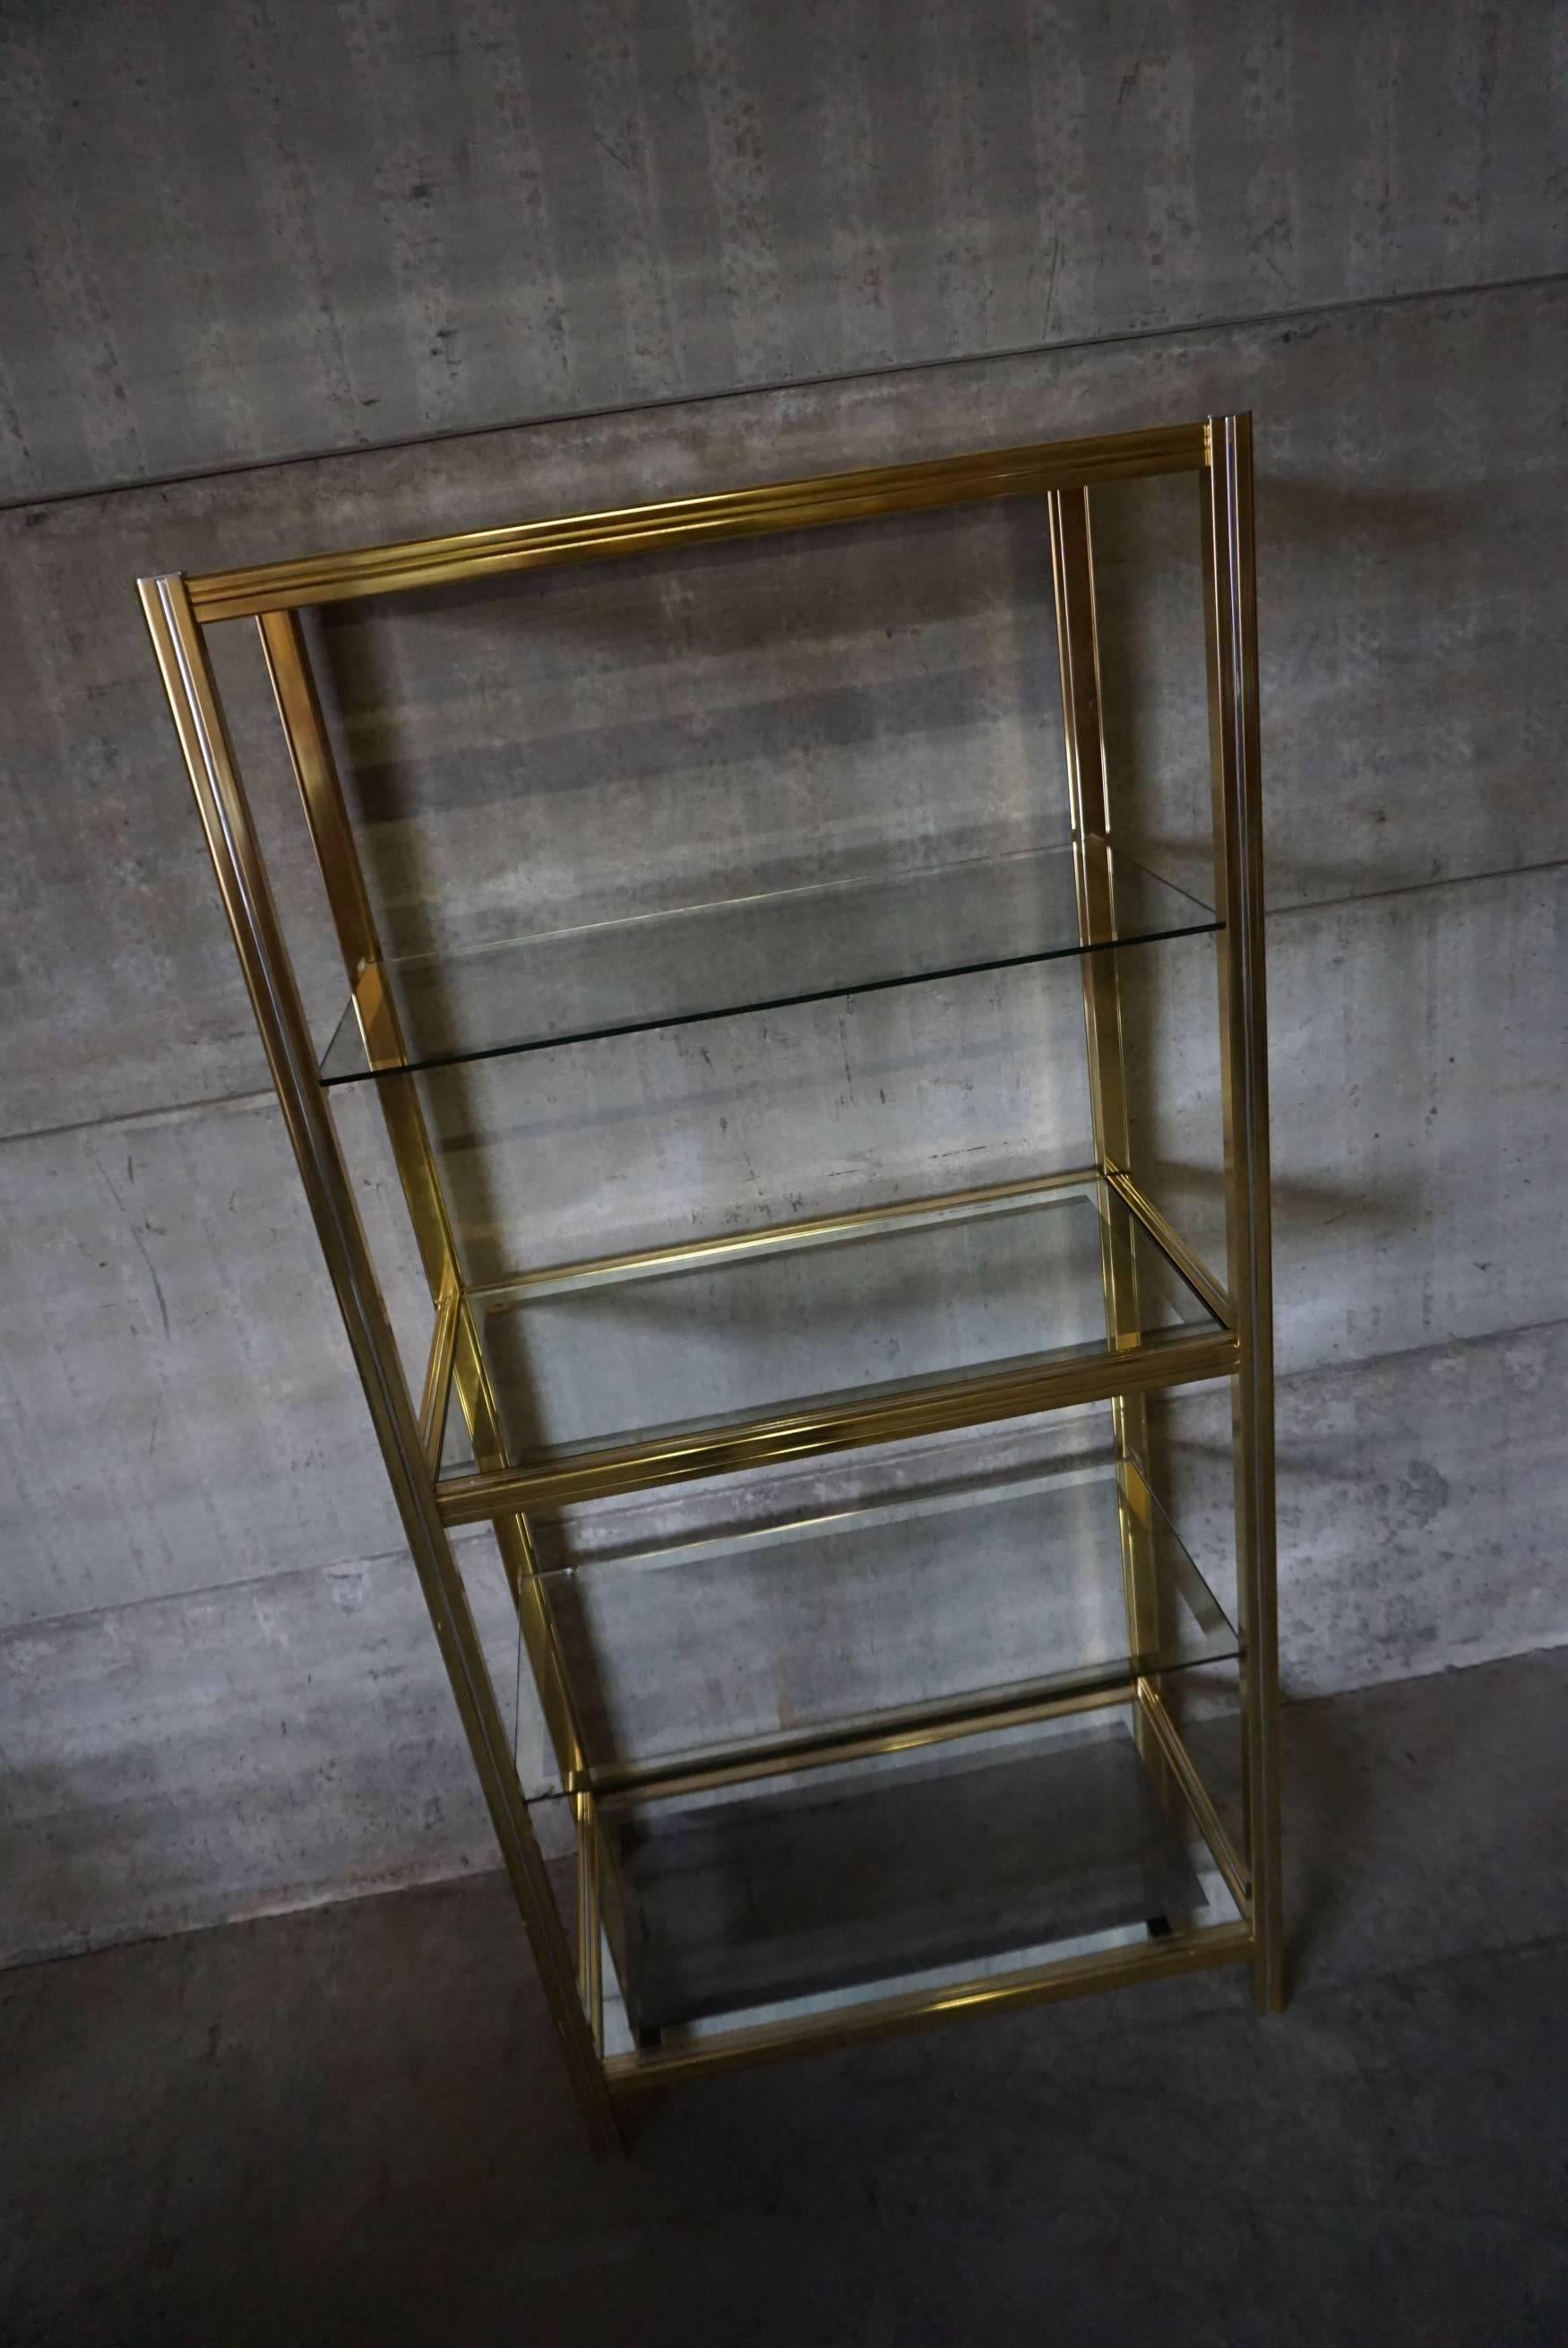 This vintage shelving unit was designed in the 1970s in Italy. It is made from polished brass and features glass shelves.